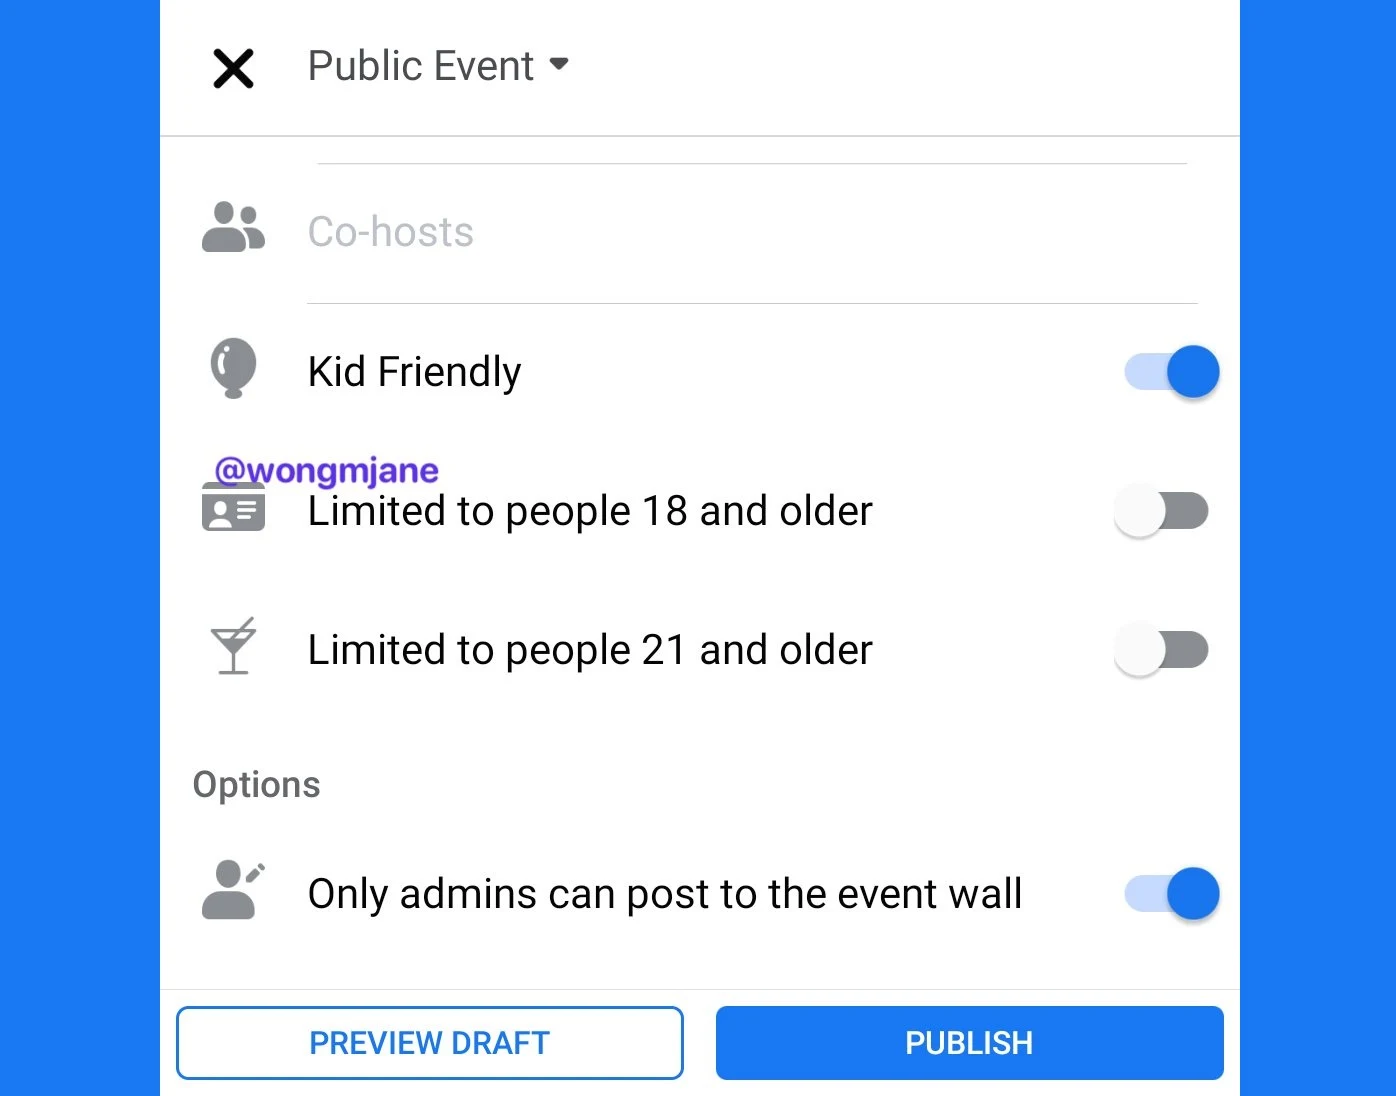 Facebook is working on Age Restrictions / Kid Friendly settings for Public Events